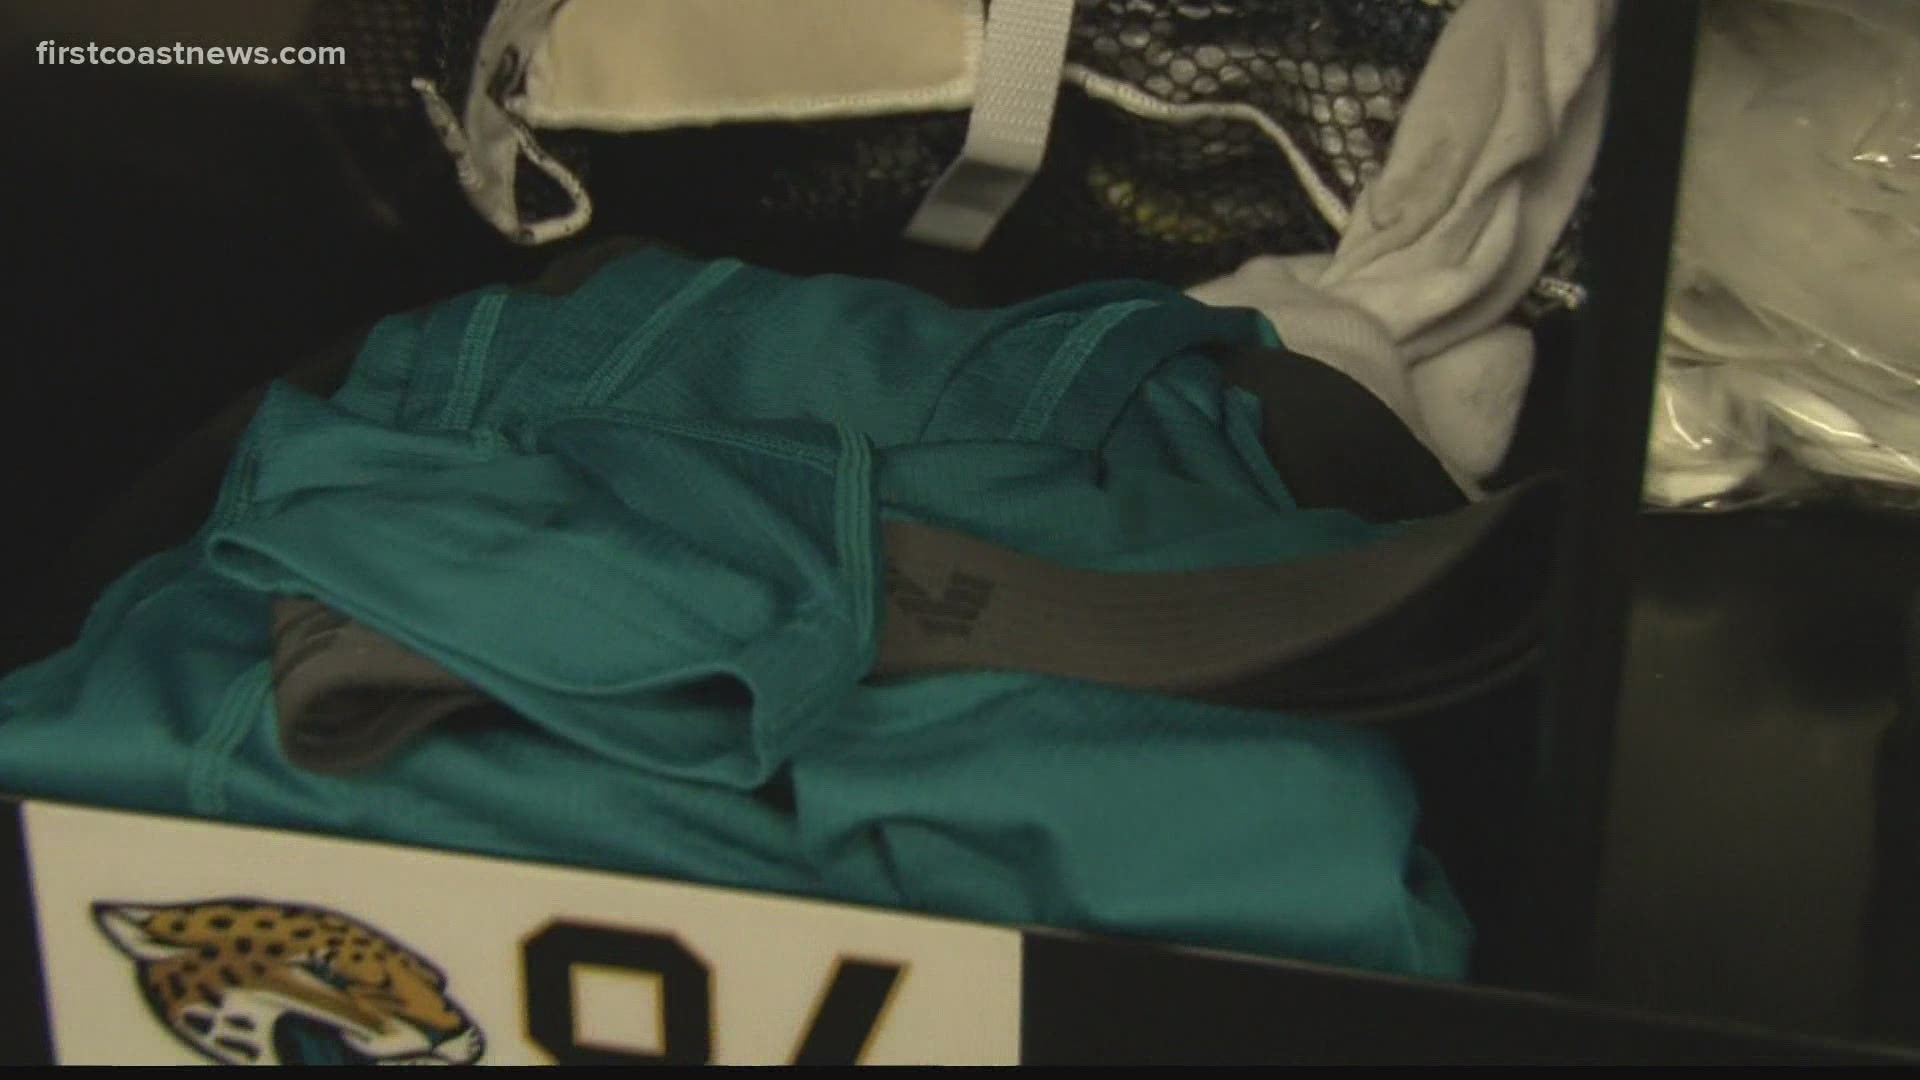 Following the Jaguars announcement that they are going back to teal as their primary home color, Mia O'Brien caught up with the team's head equipment manager